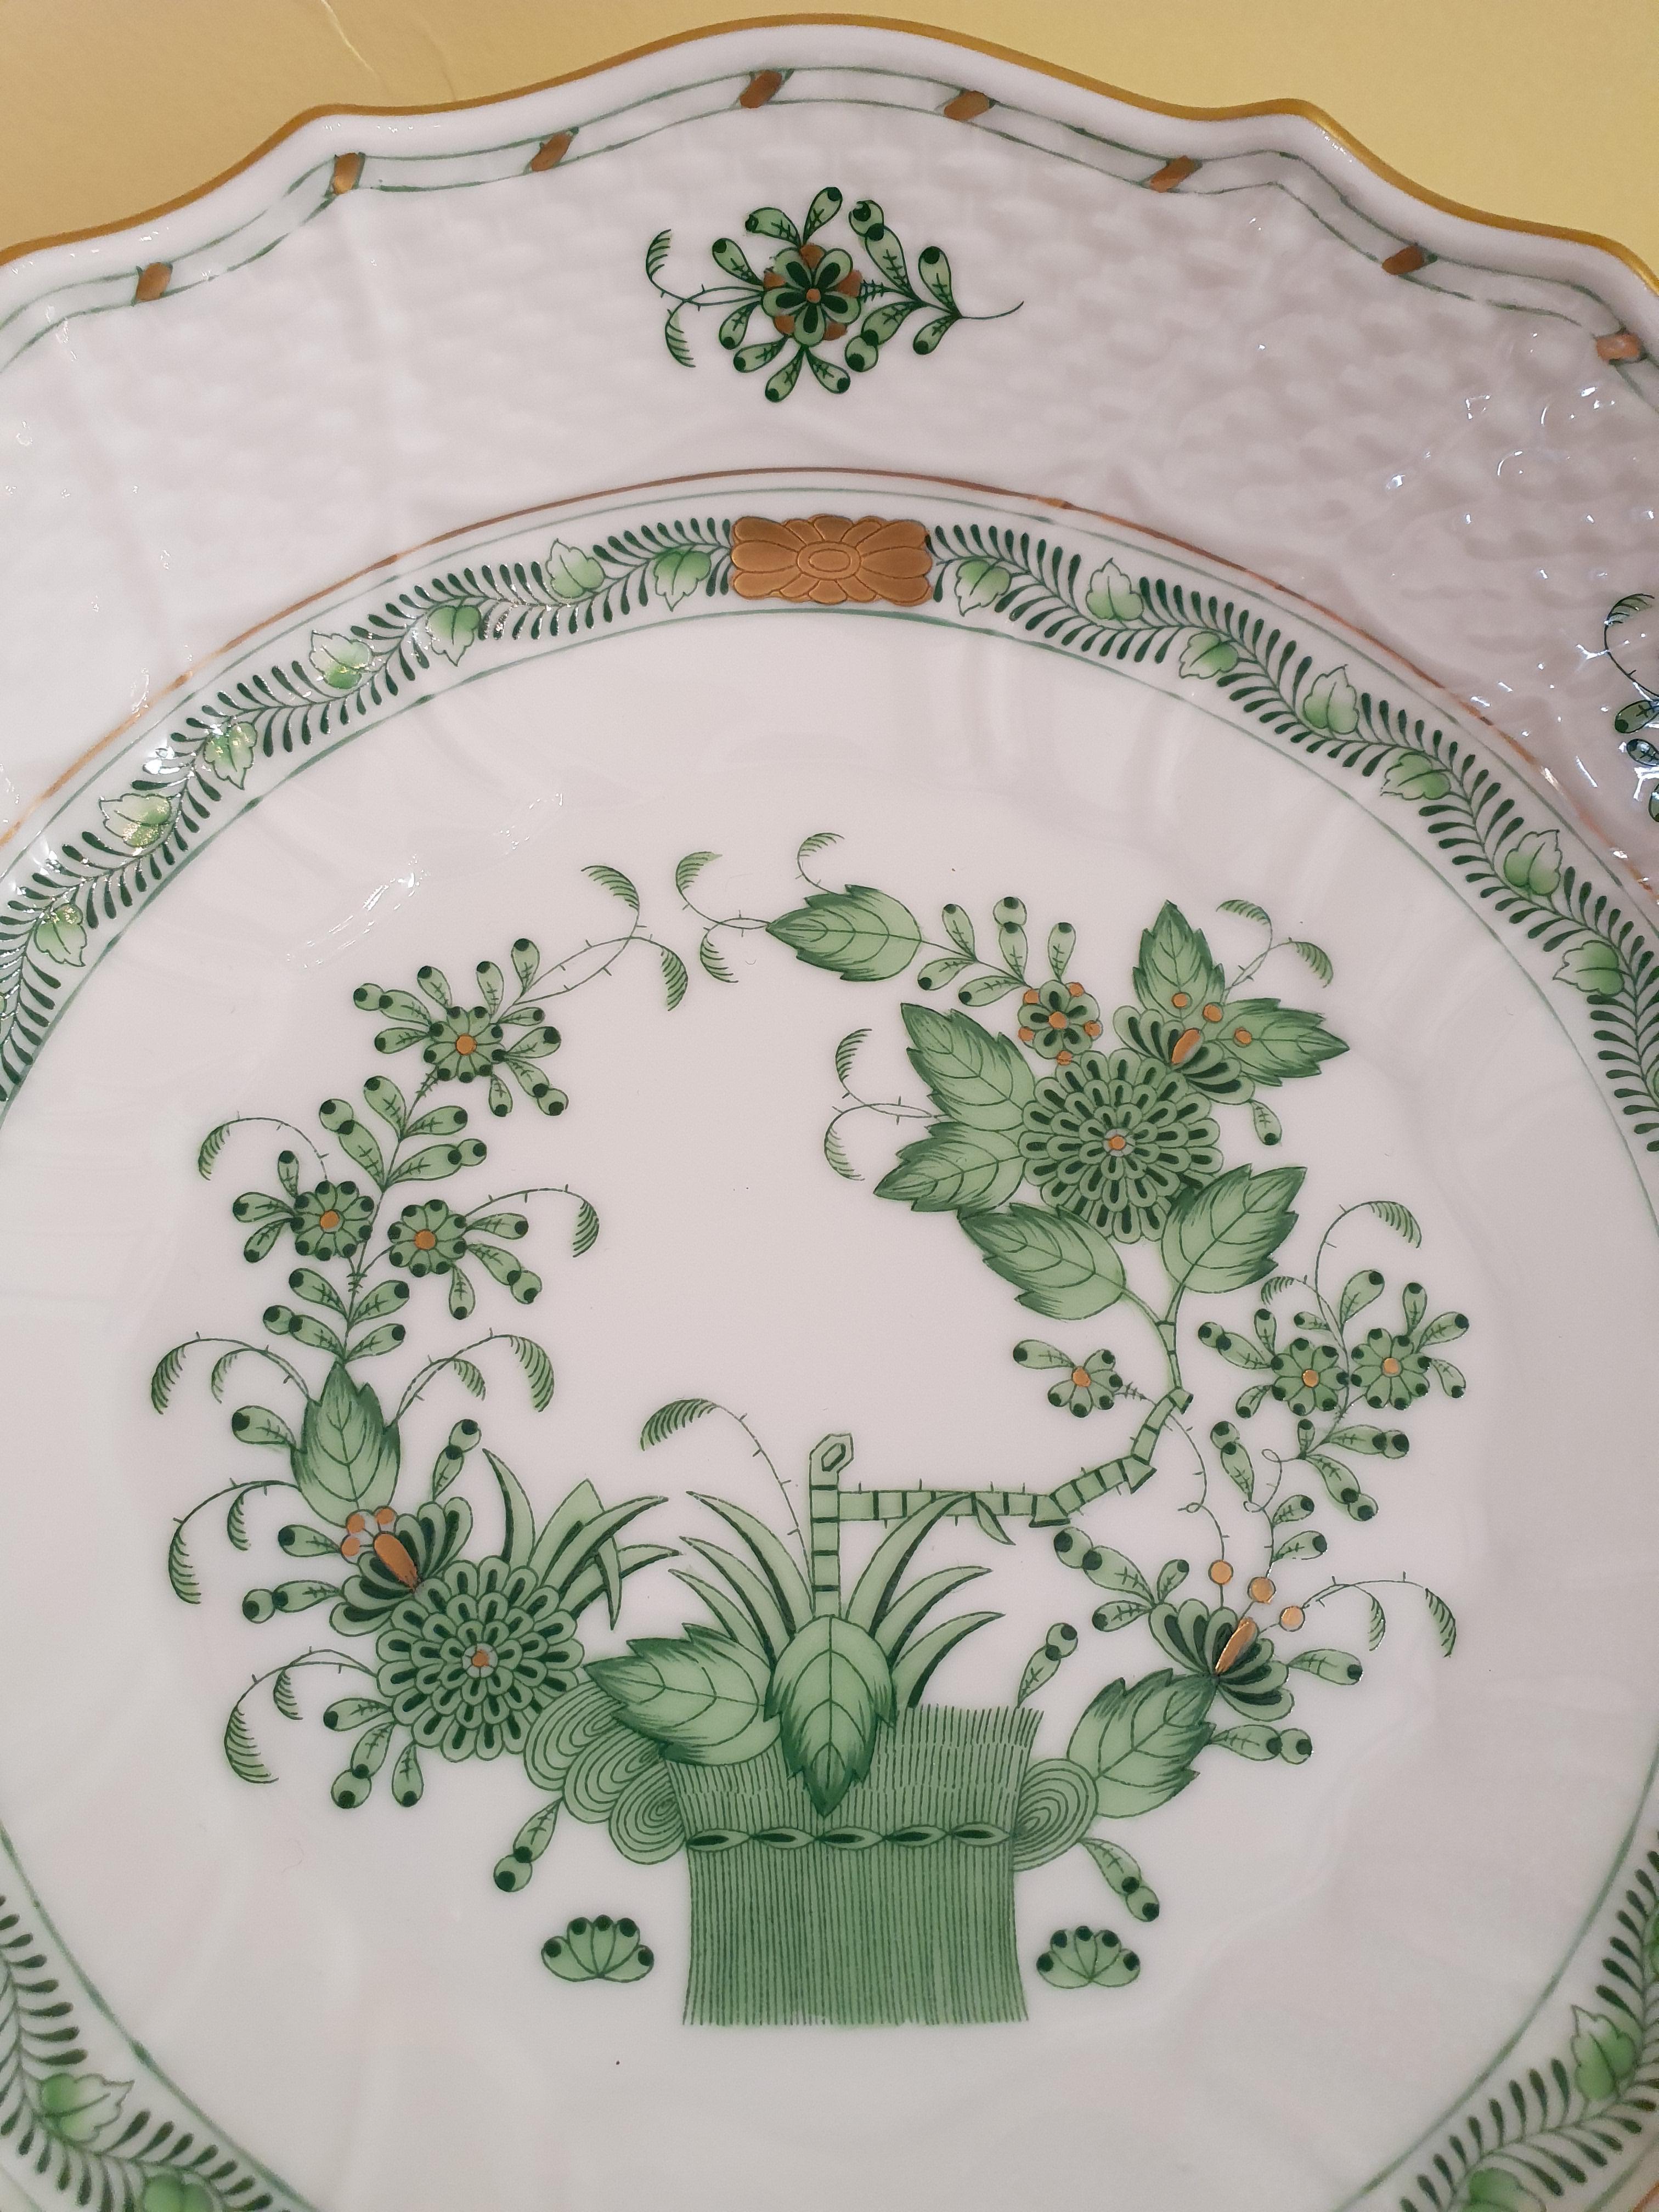 Stylish compotier in Hungarian hand painted porcelain.
Introduced in the 1850s, this pattern's original name was 